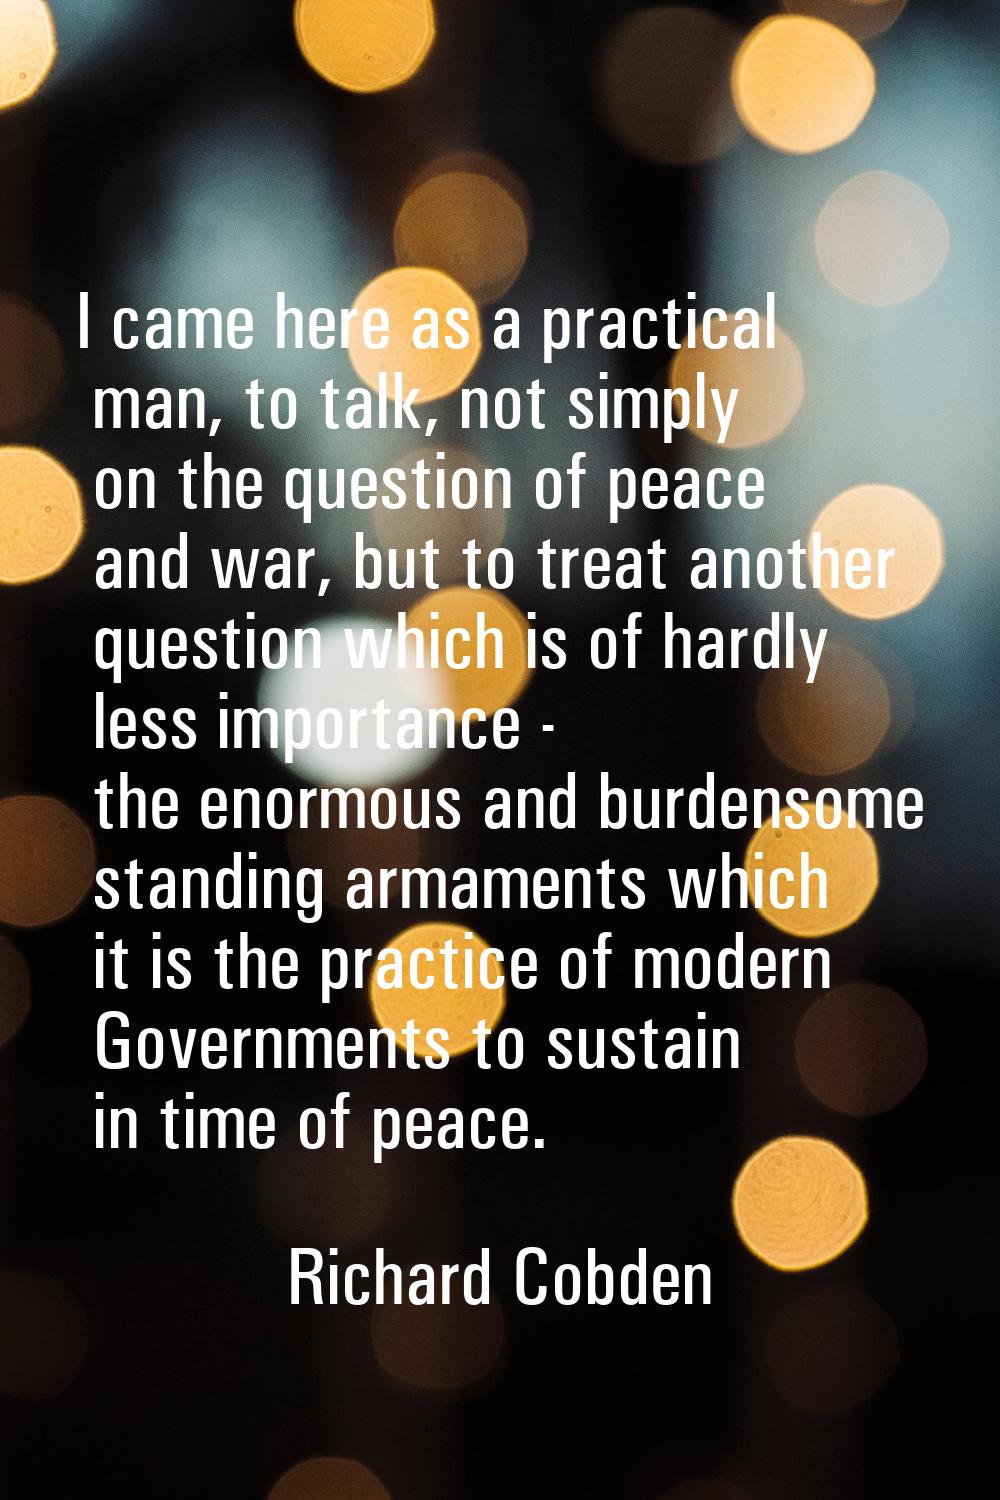 I came here as a practical man, to talk, not simply on the question of peace and war, but to treat 